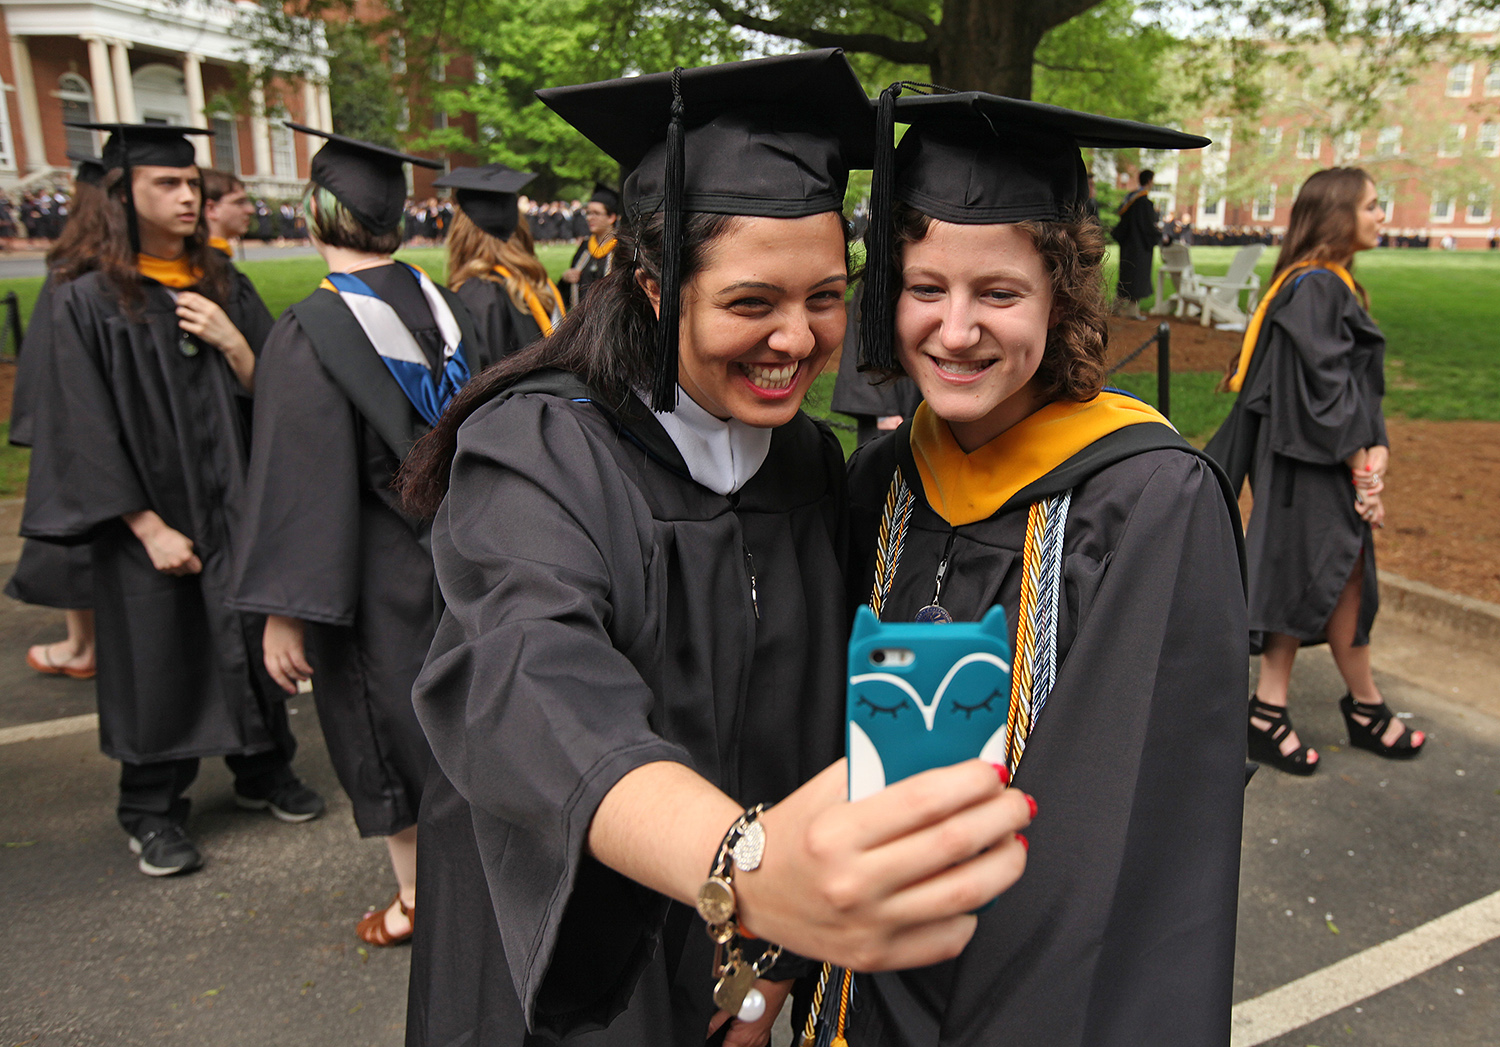 A Look Back at Commencement Through Photos, Social Media News